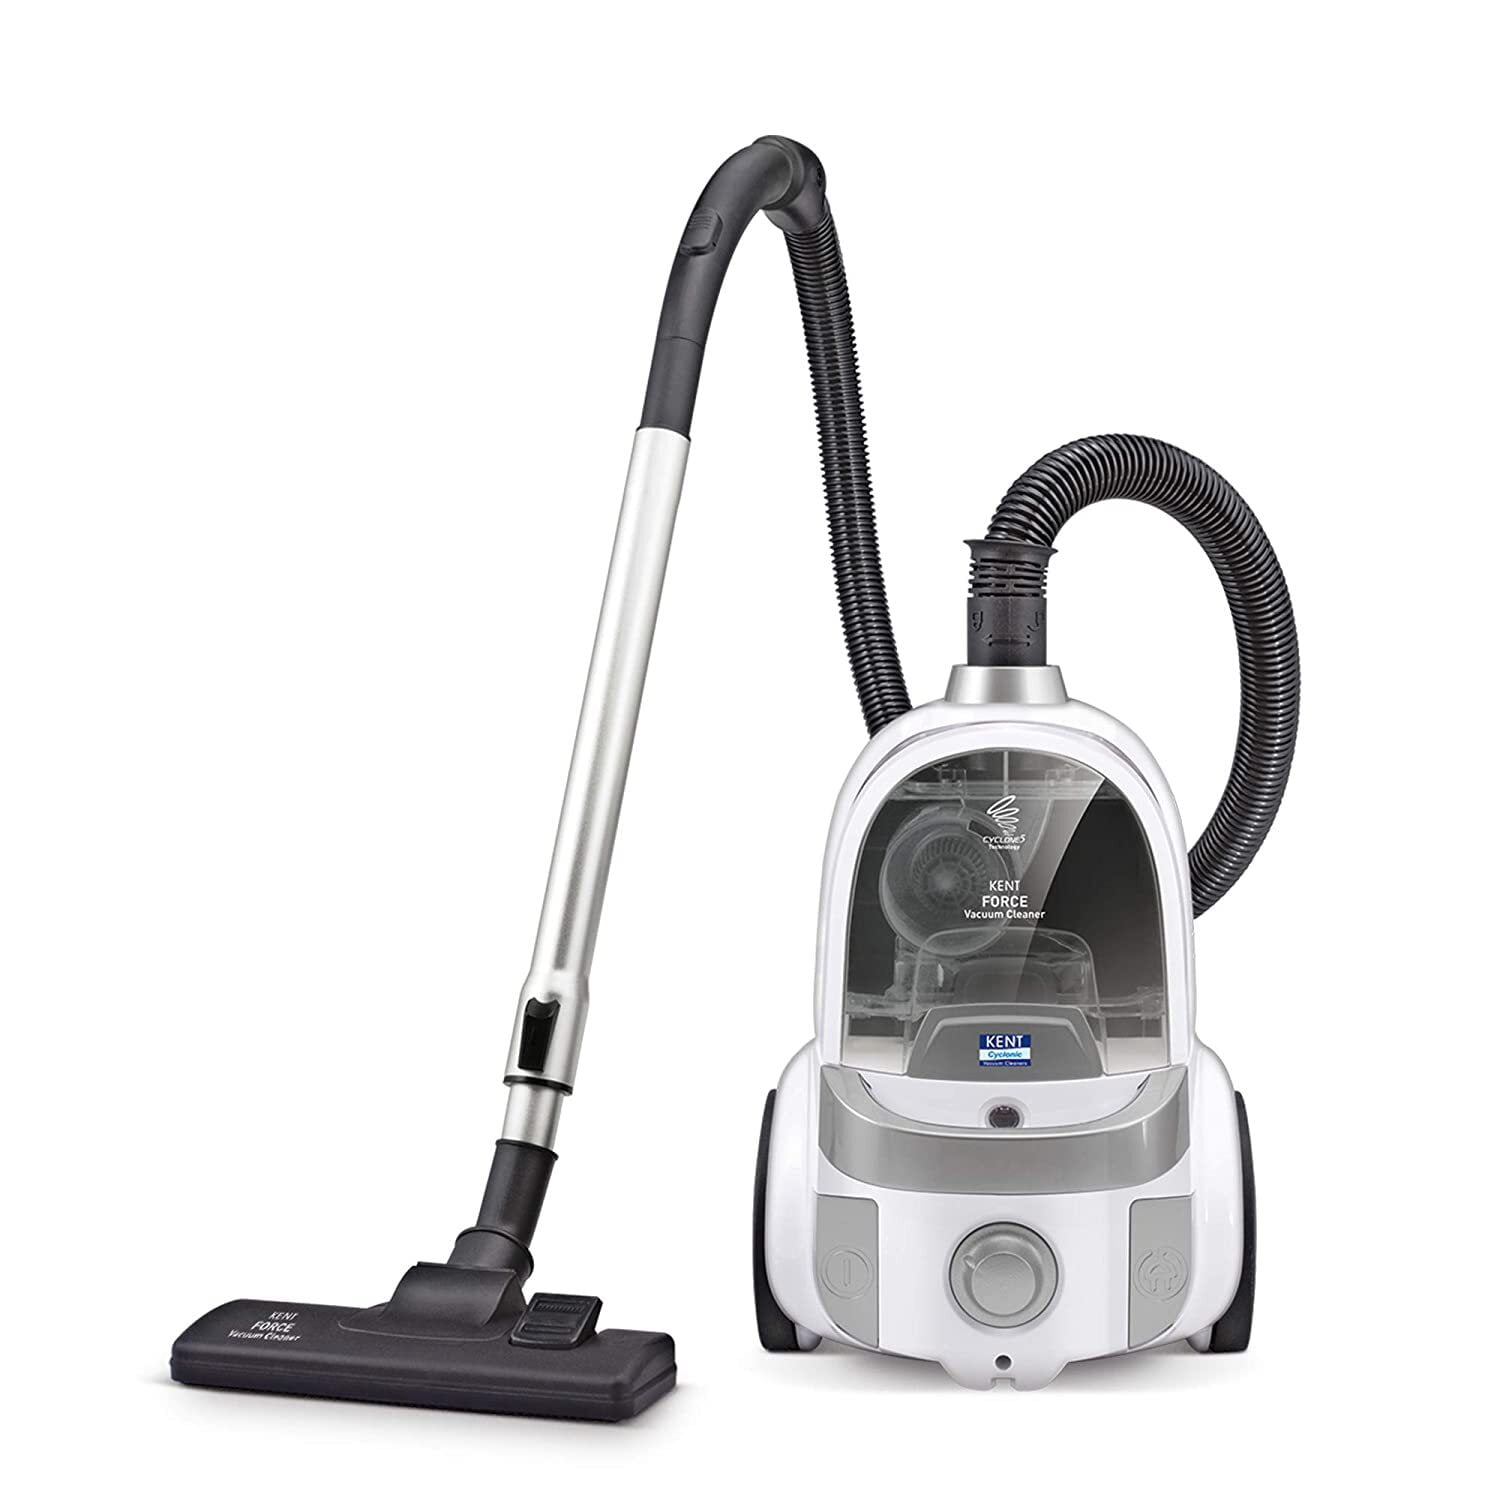 Kent Force Cyclonic Vacuum Cleaner On Dillimall.Com